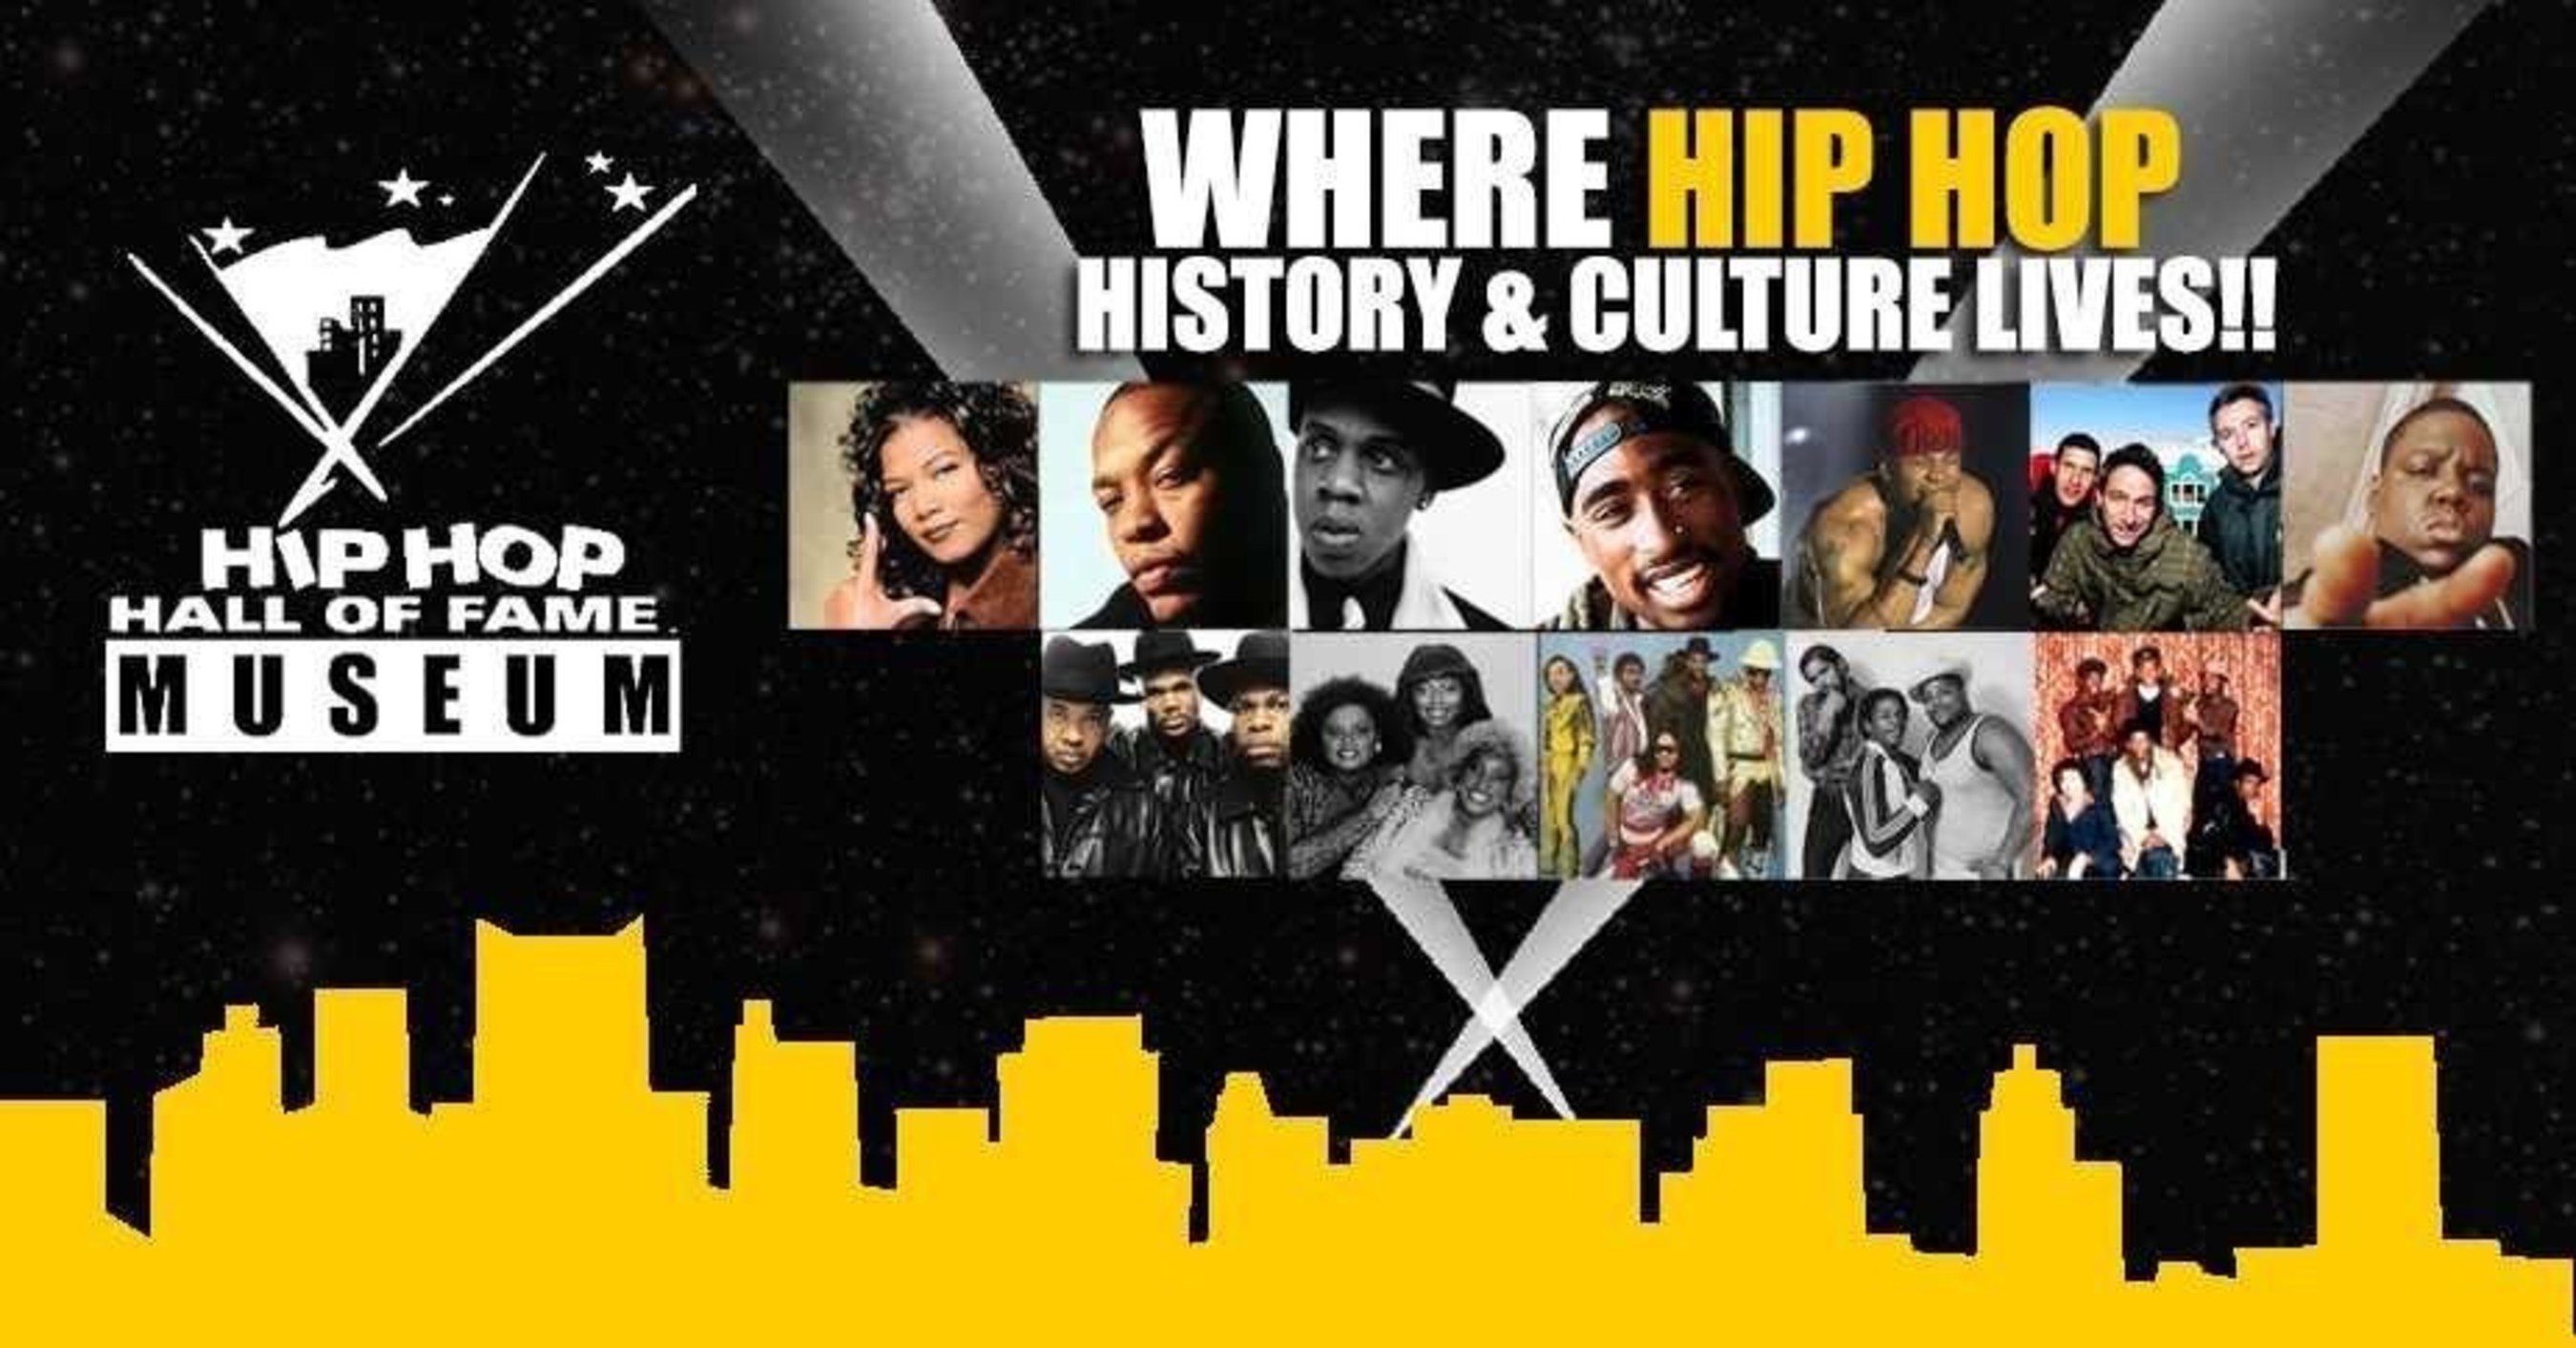 Hip Hop Hall of Fame + Museum is Coming to Harlem, NYC! Hip Hop Hall of Fame Awards TV Show tapes December 2015.